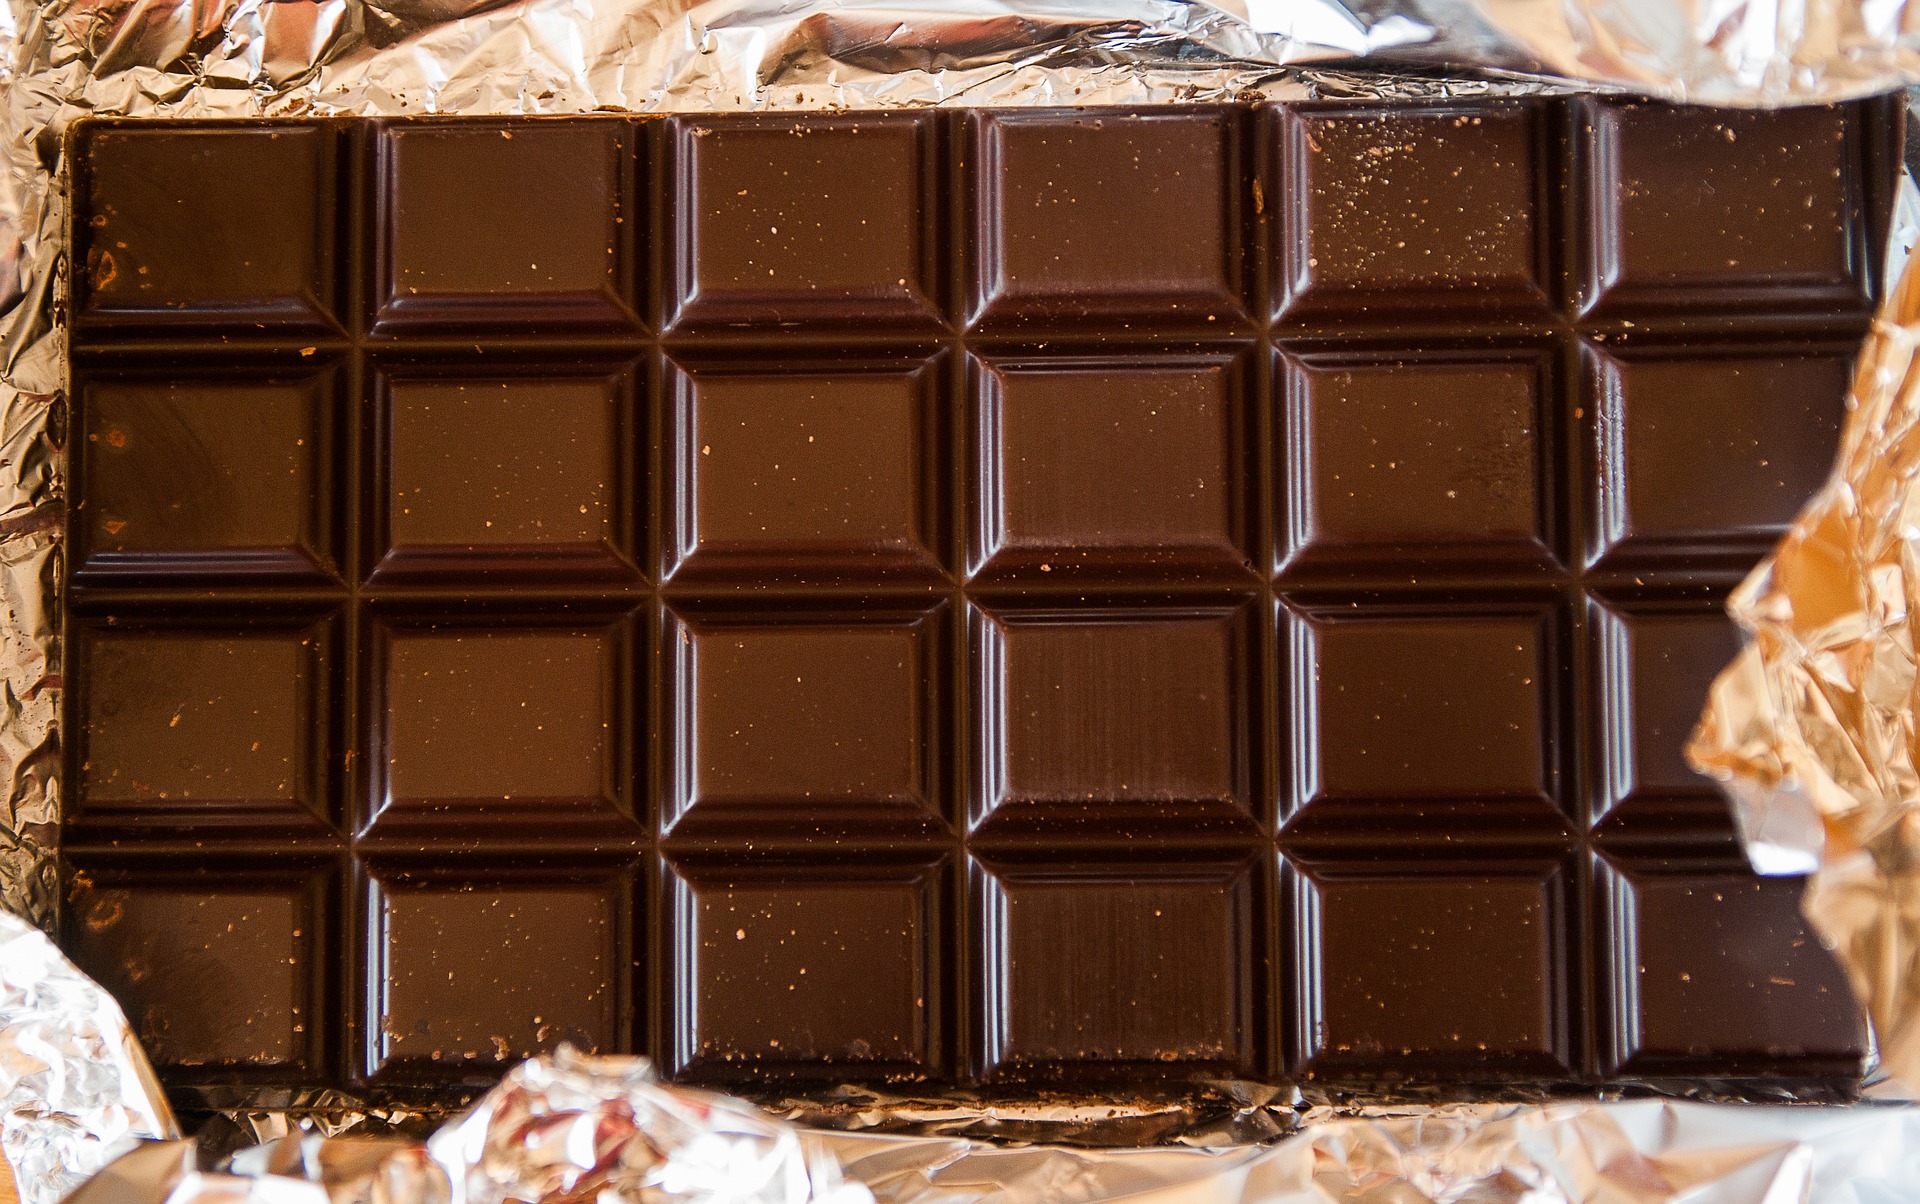 Keep your love of chocolate from destroying the planet with this one easy fix